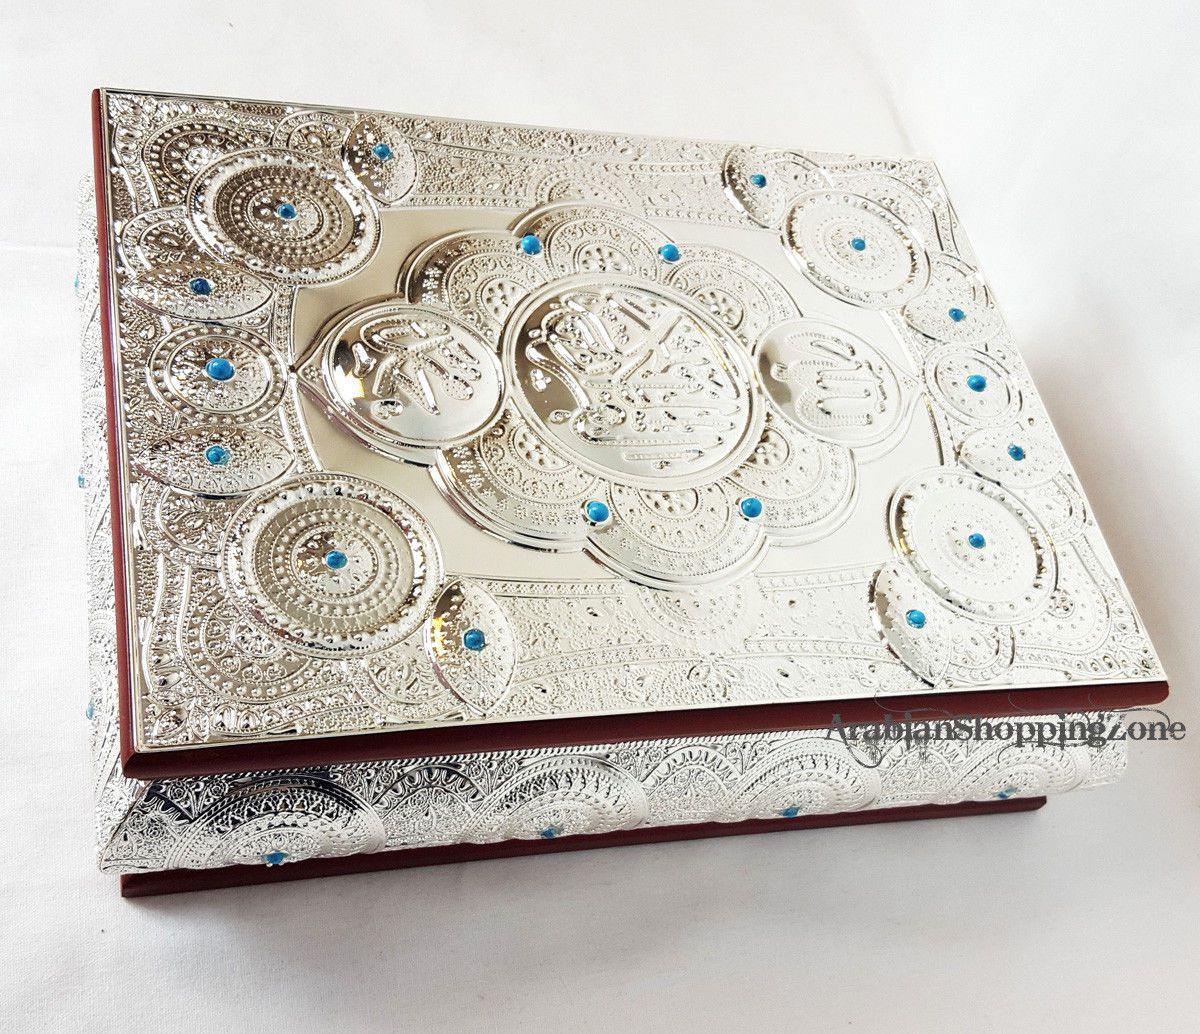 10" Quran Silver Covered Decorated Wooden Storage Box #2314S - Arabian Shopping Zone